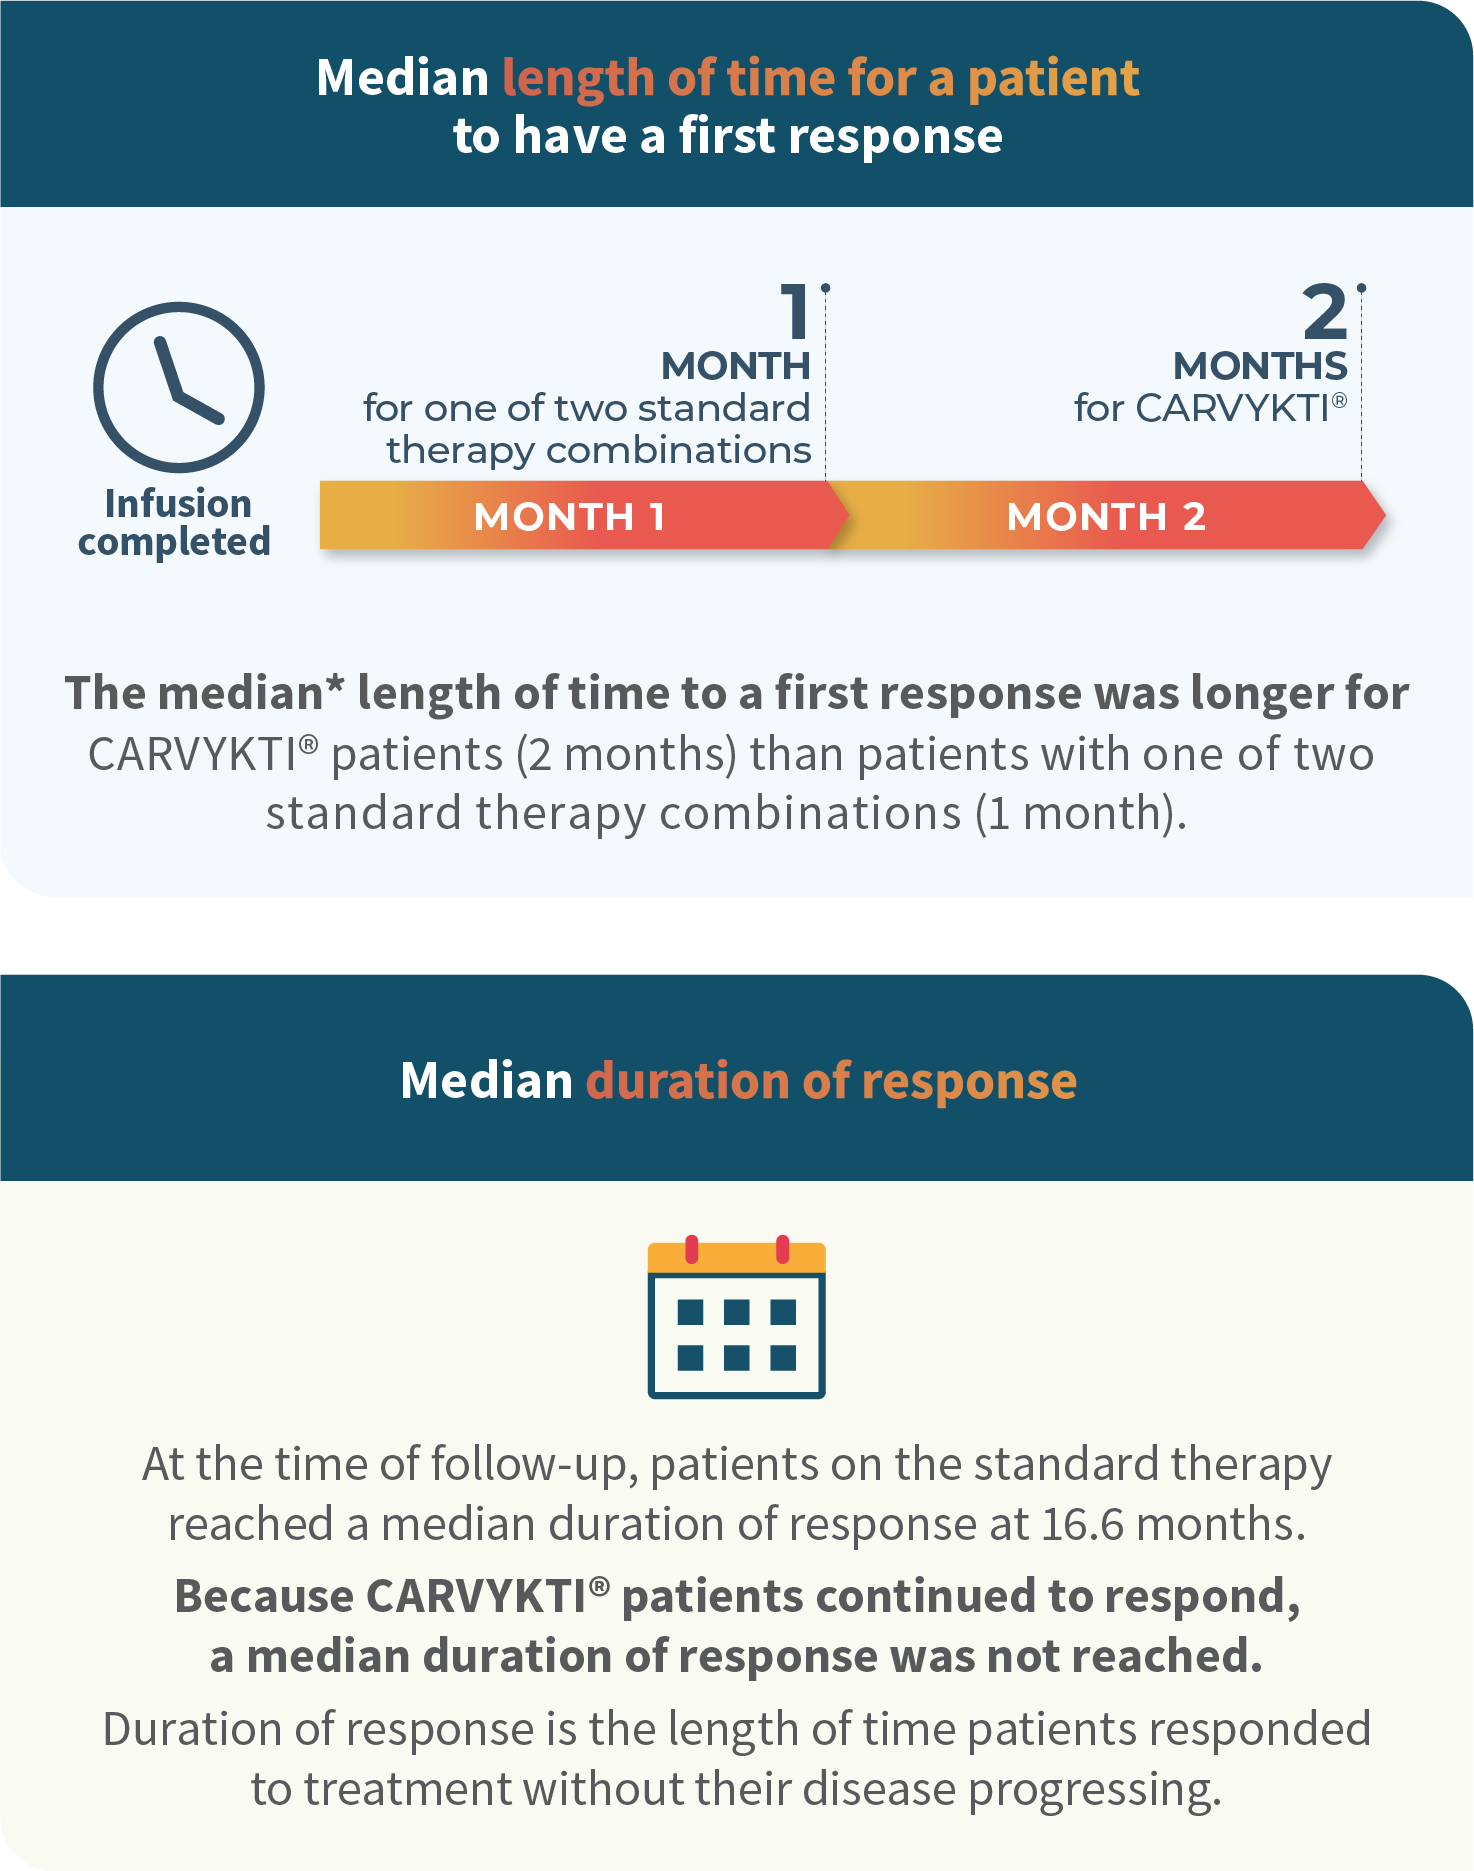 Median length of time for a patient to have a first response and median duration of response